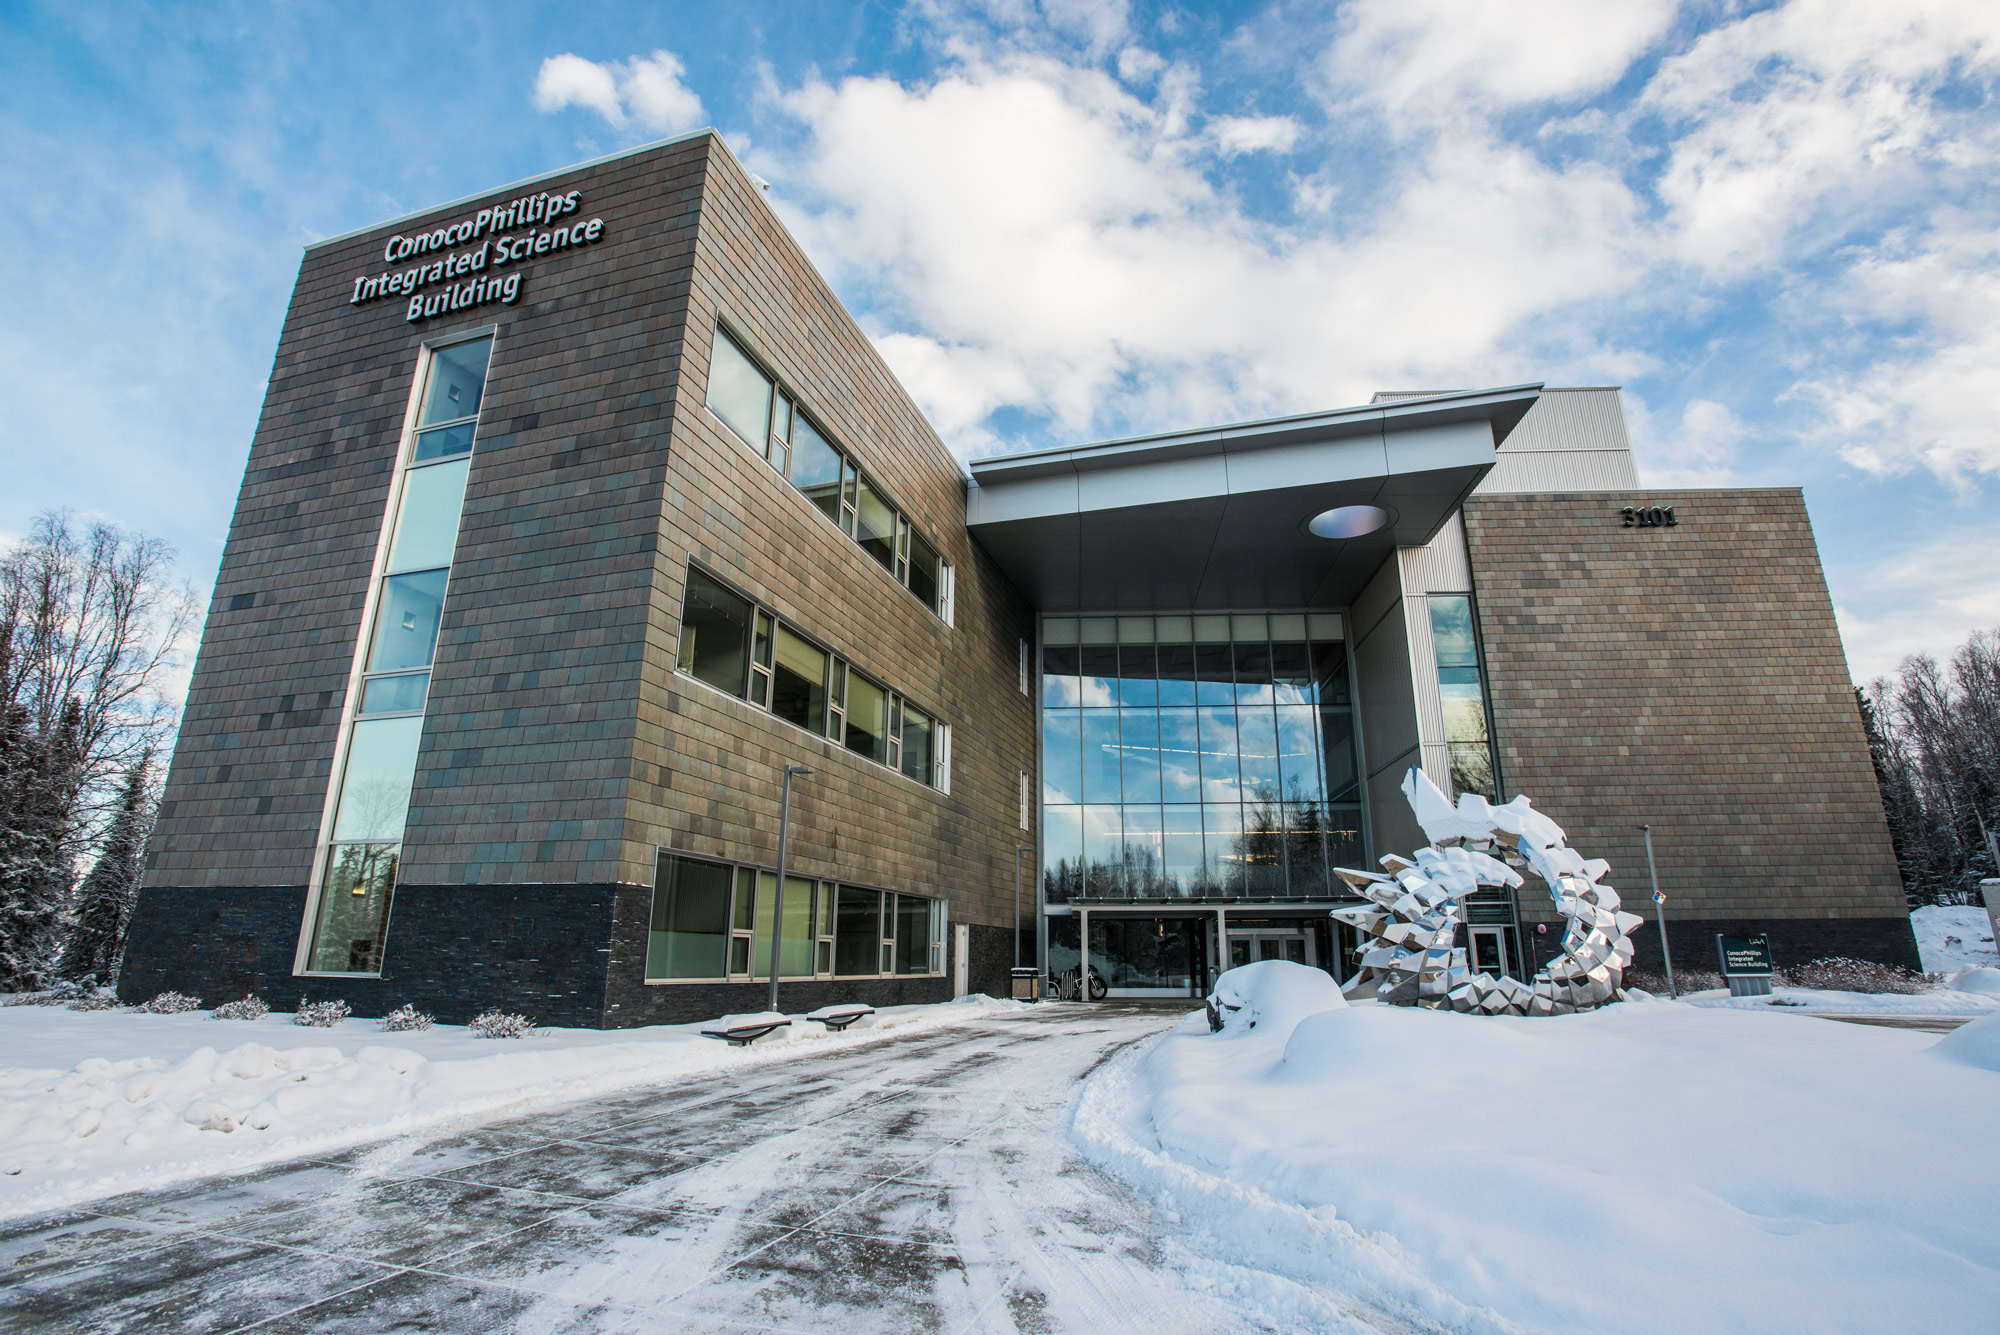 UAA's ConocoPhillips Integrated Science Building